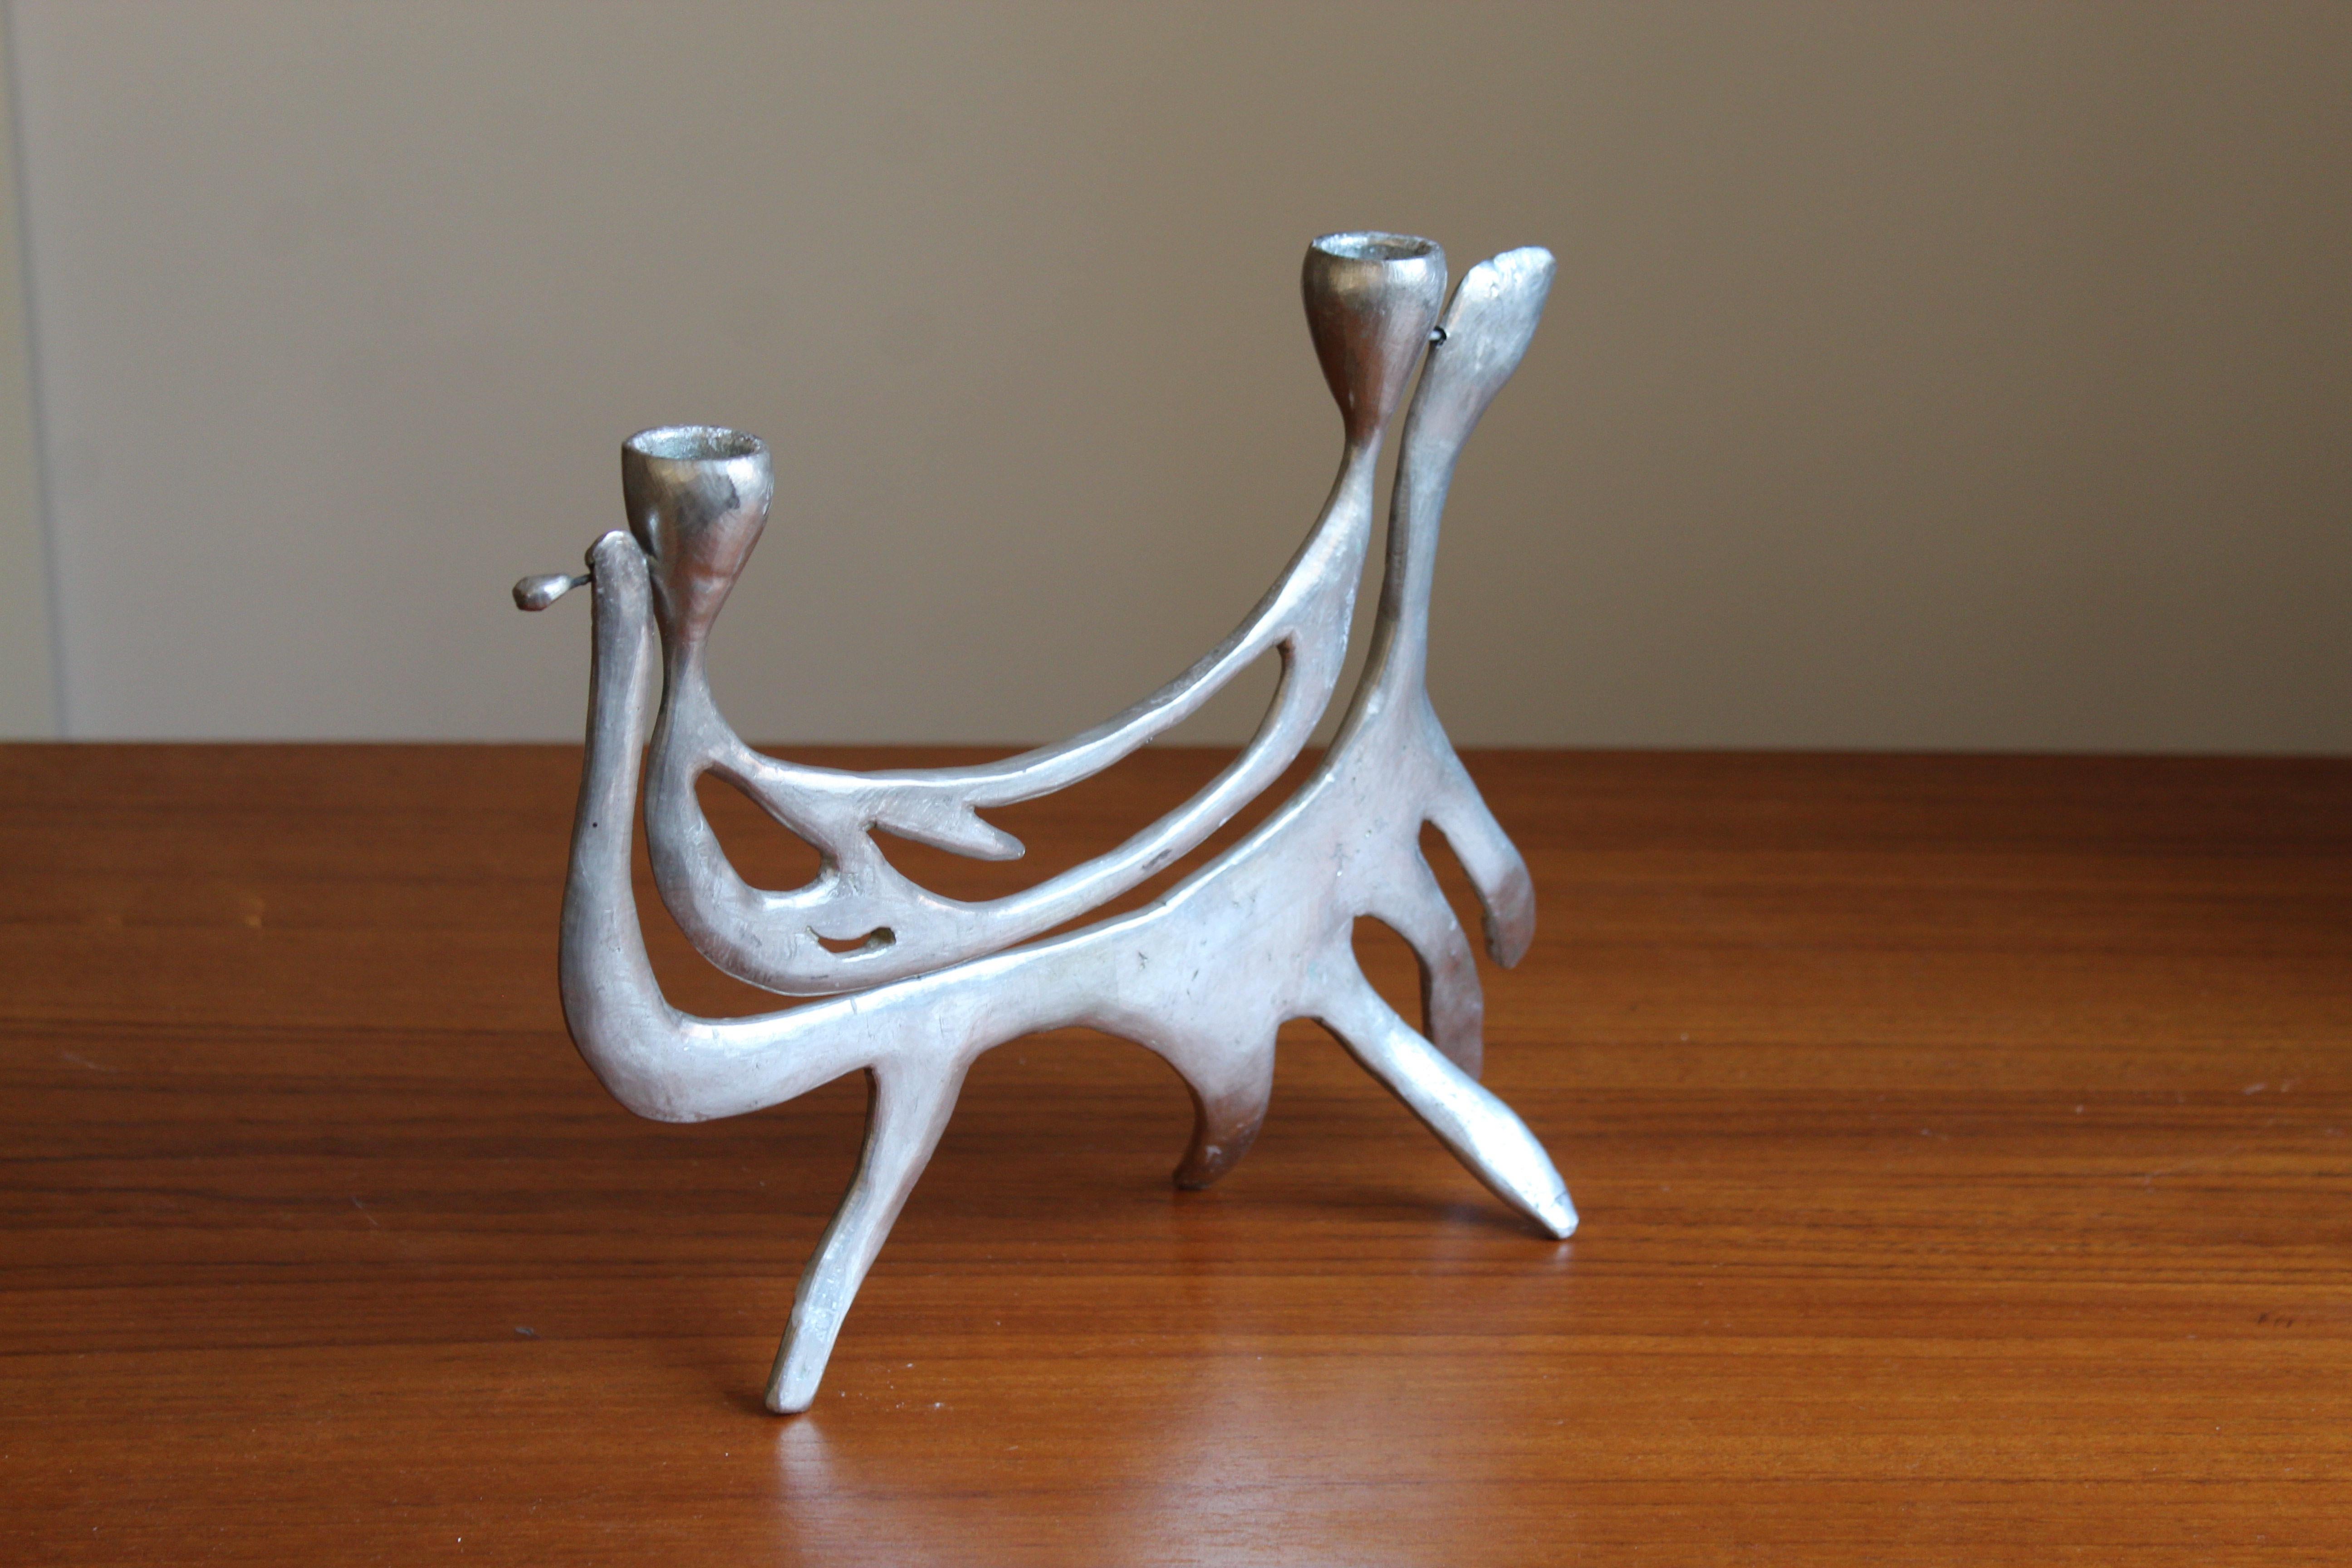 A candle holder / candelabra produced by Rolf Swedberg, Studio, Sweden, 1970. Signed

Other designers of the period include Josef Frank, Paavo Tynell, Serge Mouille, and Hans Bergström, and Isamu Noguchi.

 